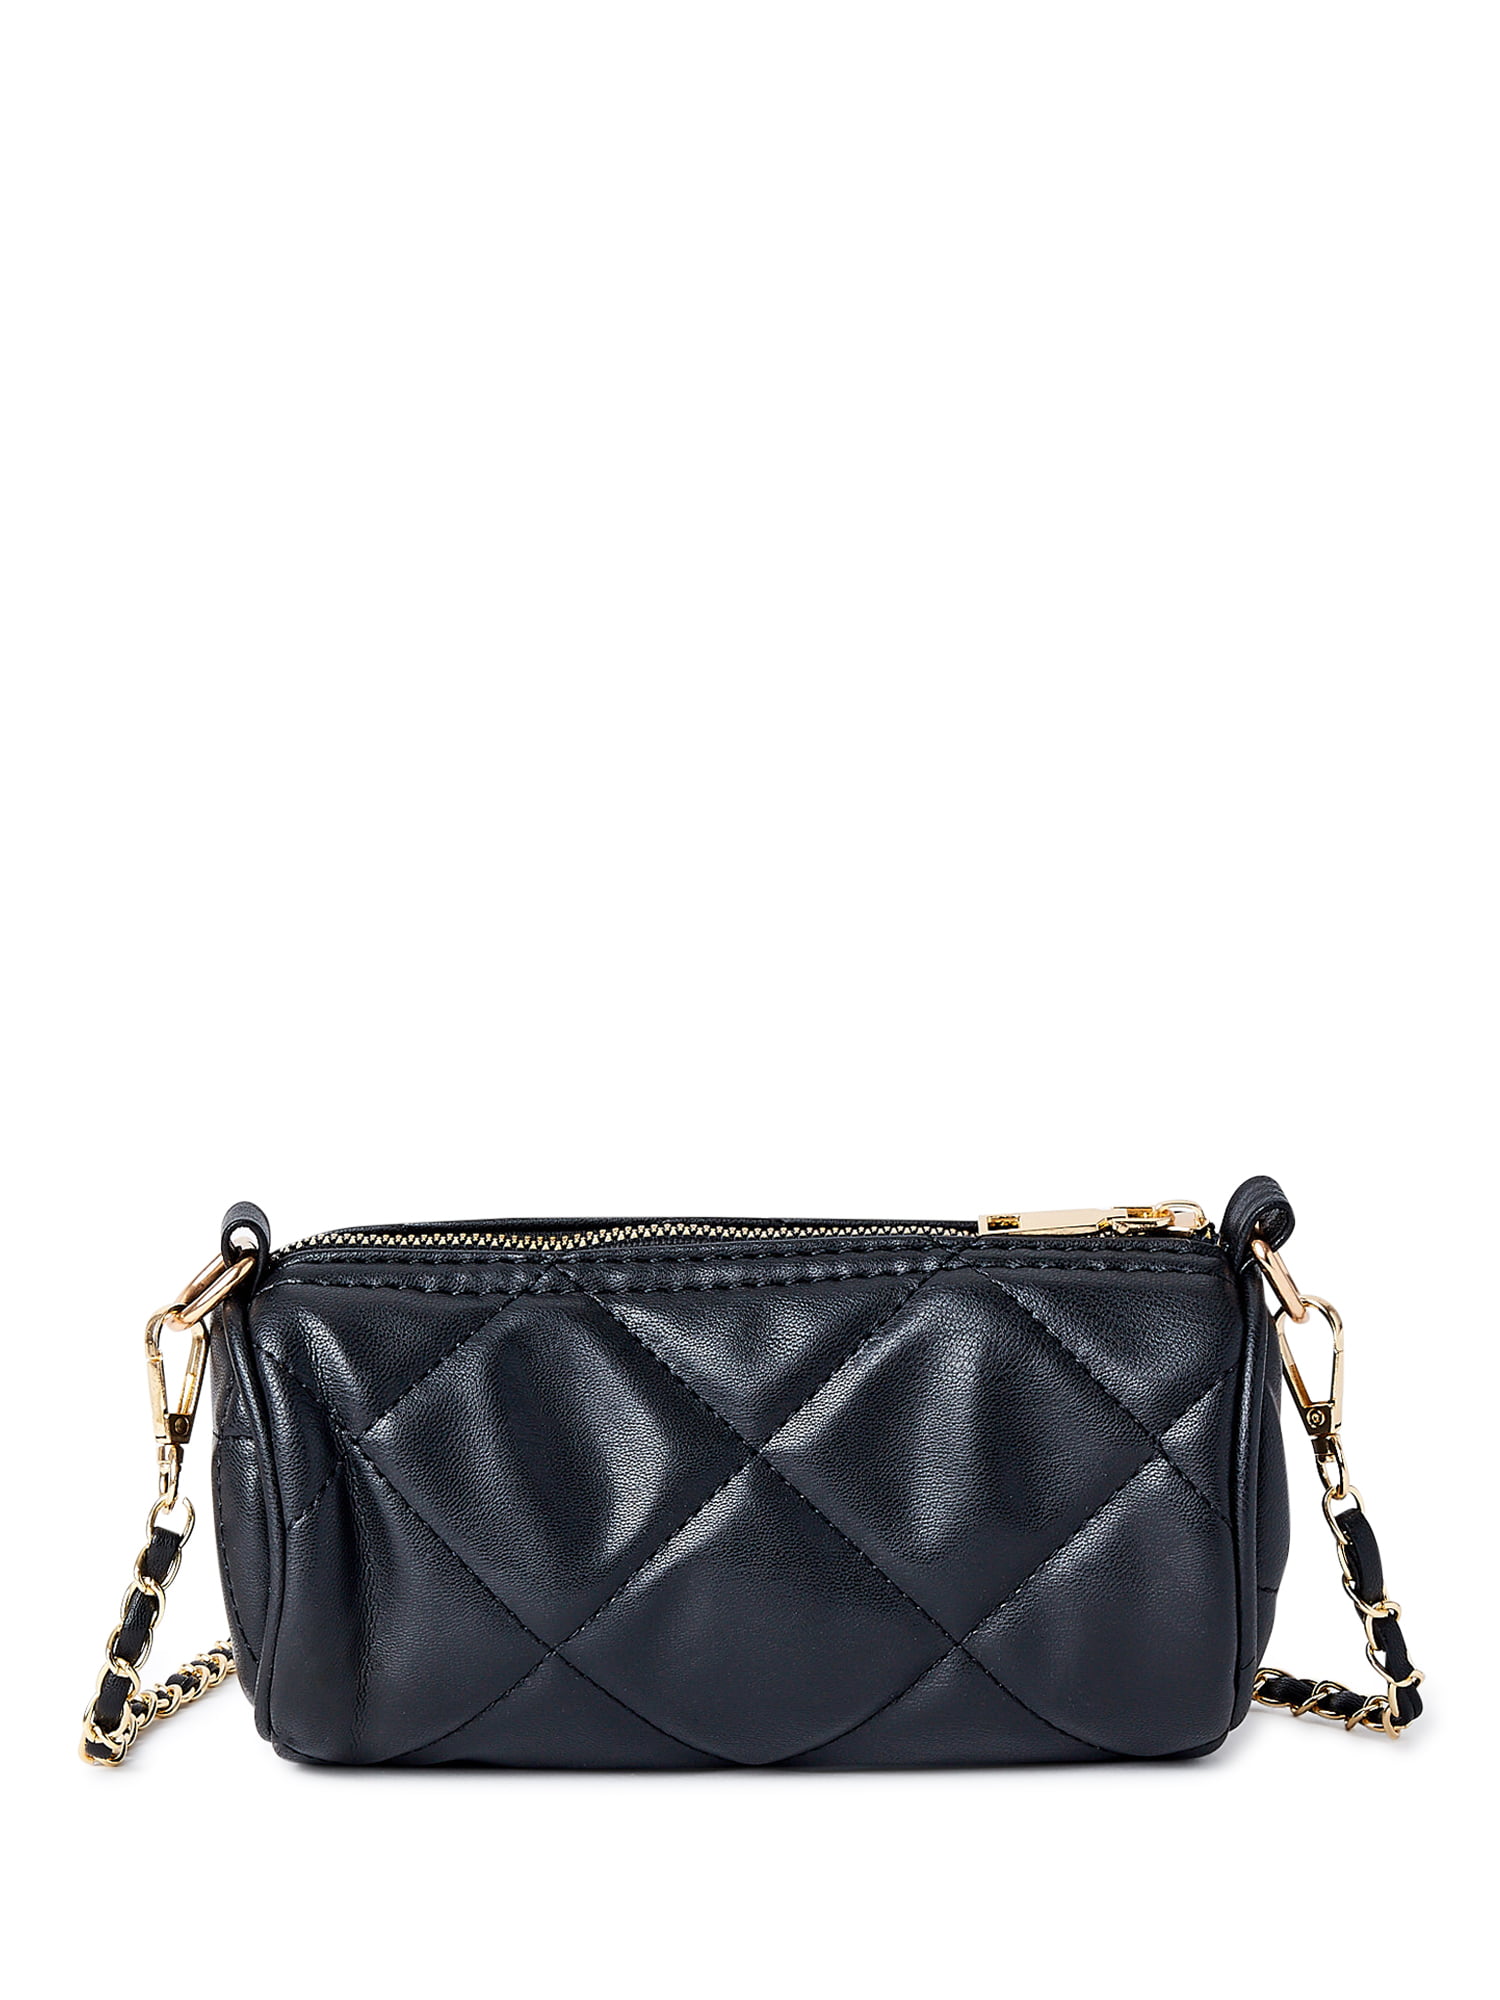 Jane & Berry Women's Small Quilted Faux Leather Barrel Bag with Gold-Tone  Chain Strap, Black 